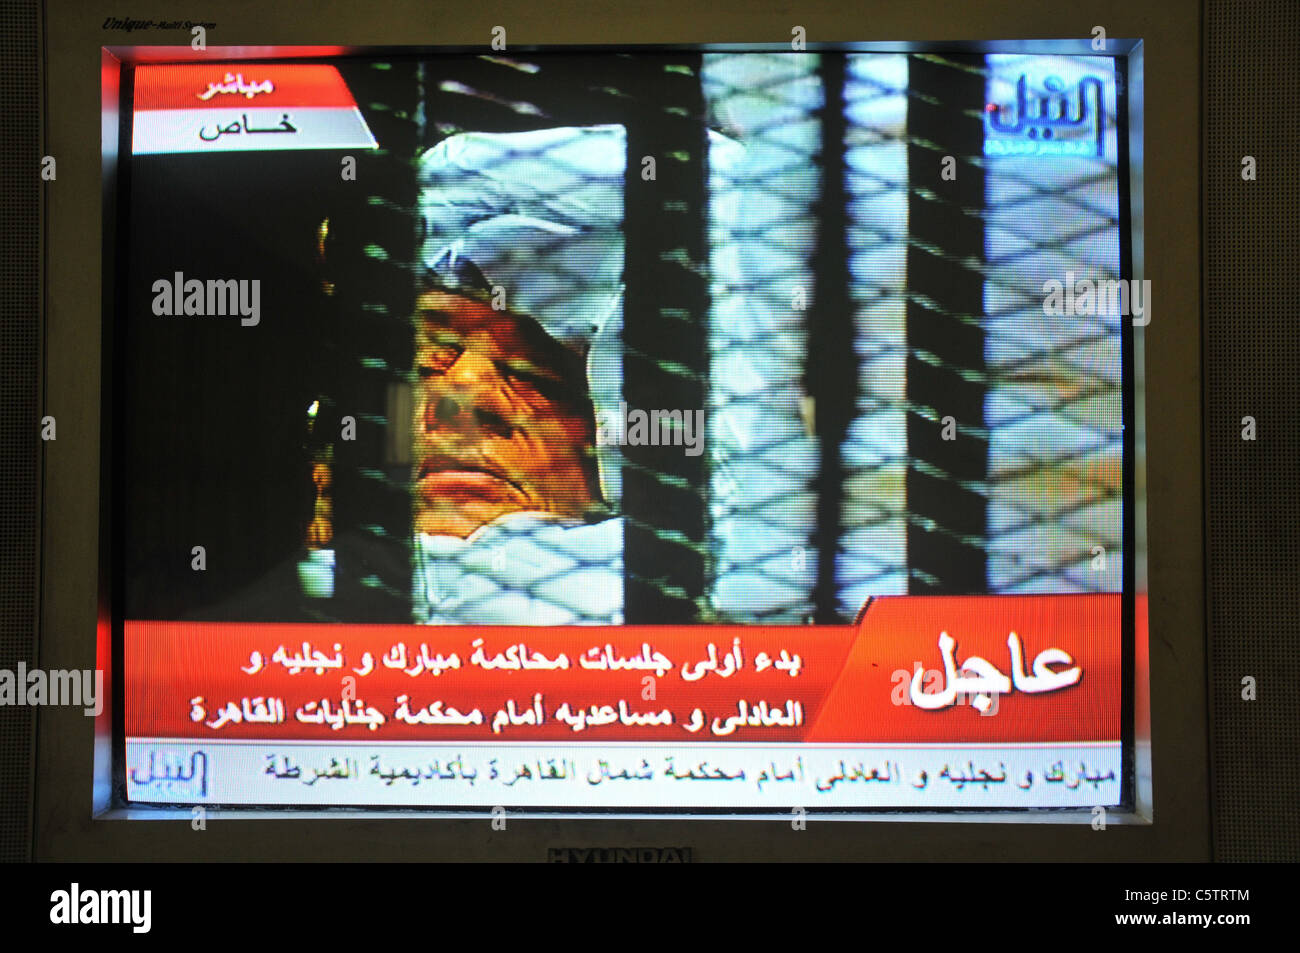 The trial of Egypt Pres Hosni Mubarak, his sons Alaa and Gamal and other top regime officials, Cairo Stock Photo